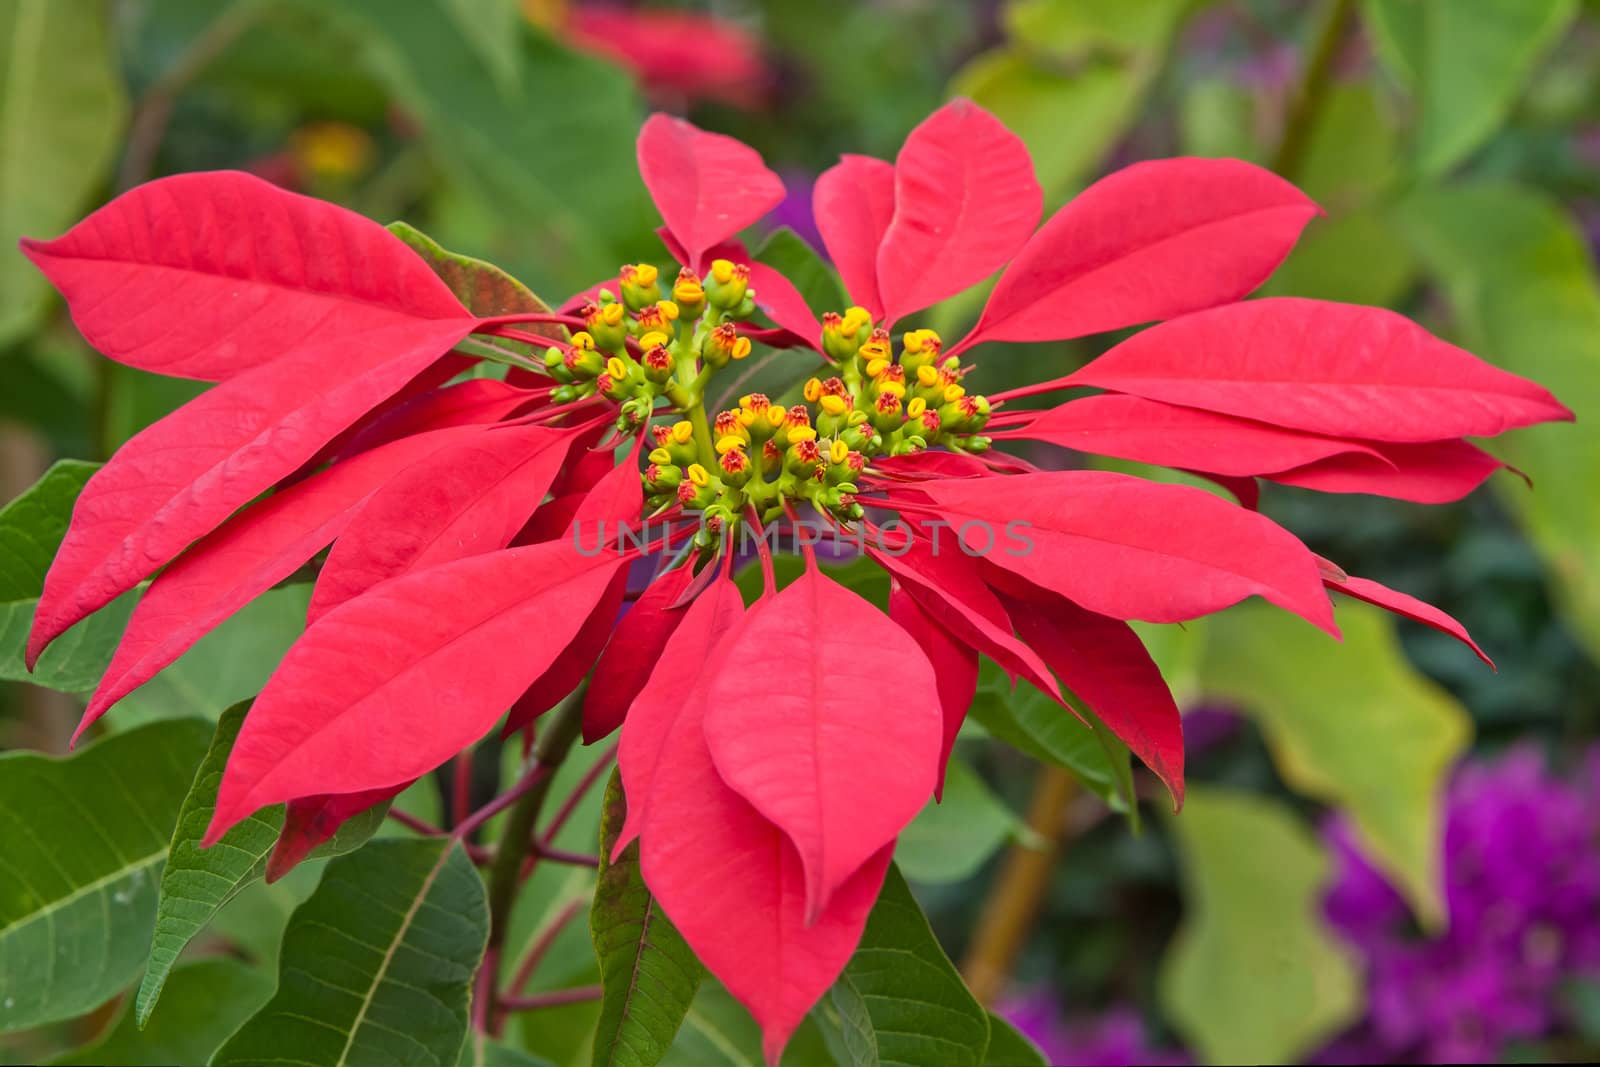 Red poinsettia in his natural environment